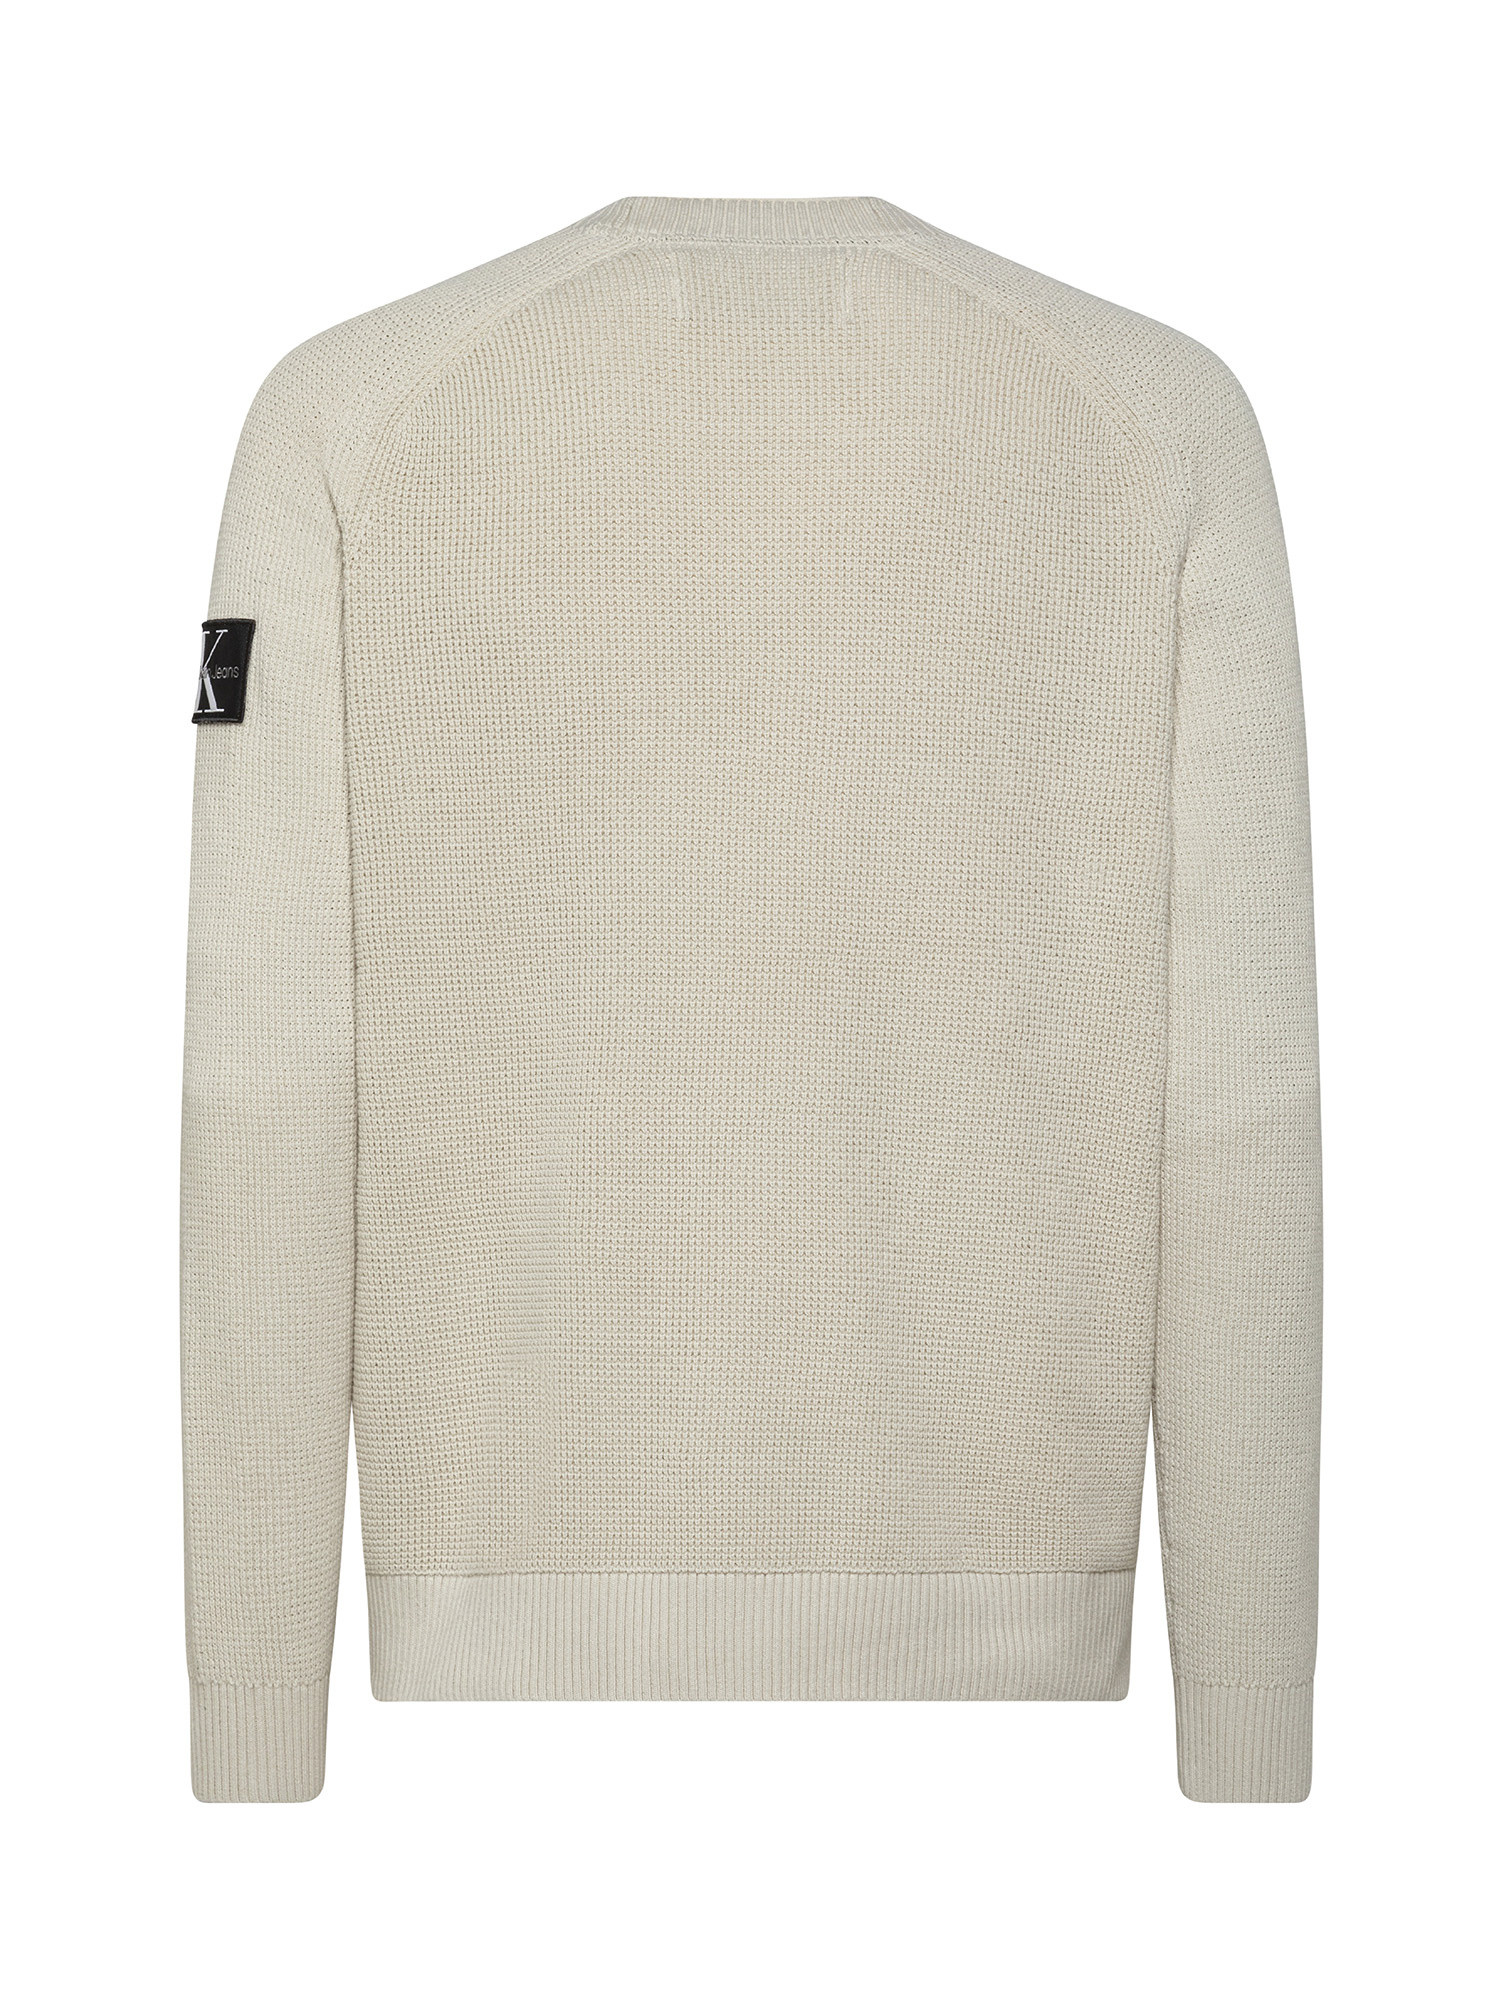 Maglione logo in cotone, Beige, large image number 1